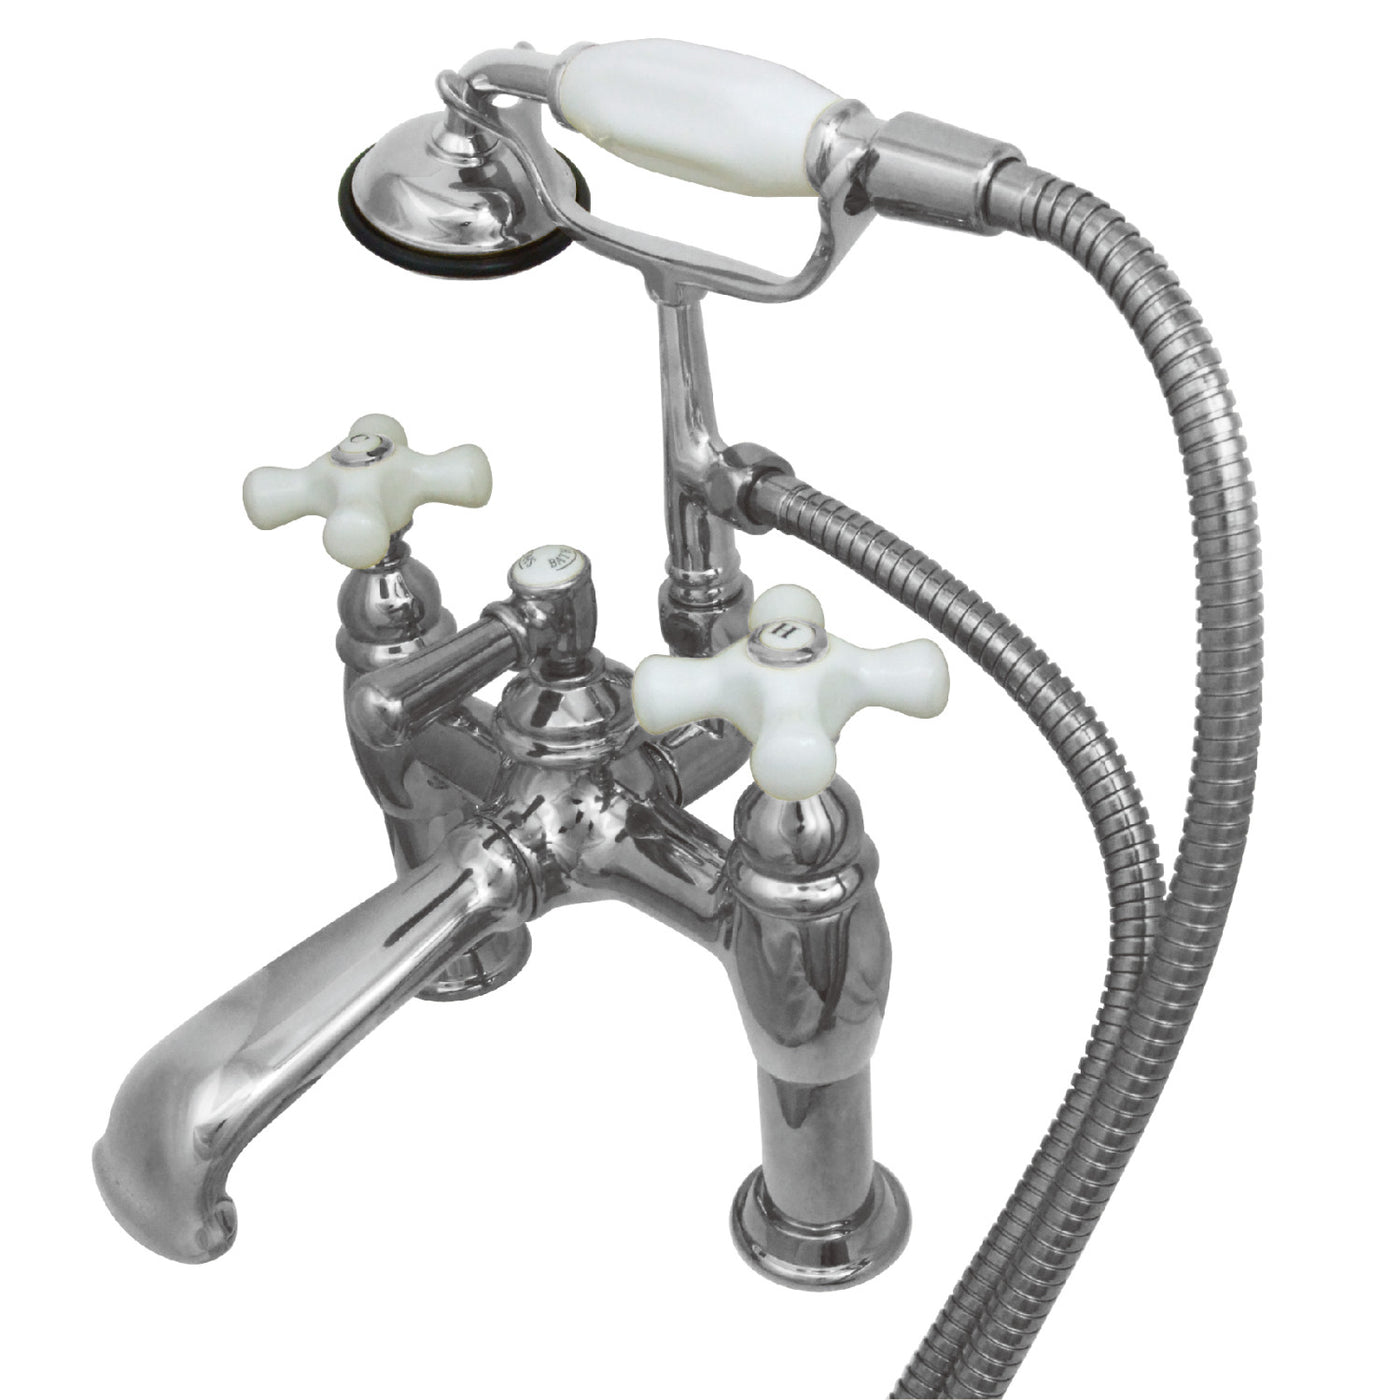 Elements of Design DT6041PX 7-Inch Deck Mount Tub Faucet with Hand Shower, Polished Chrome